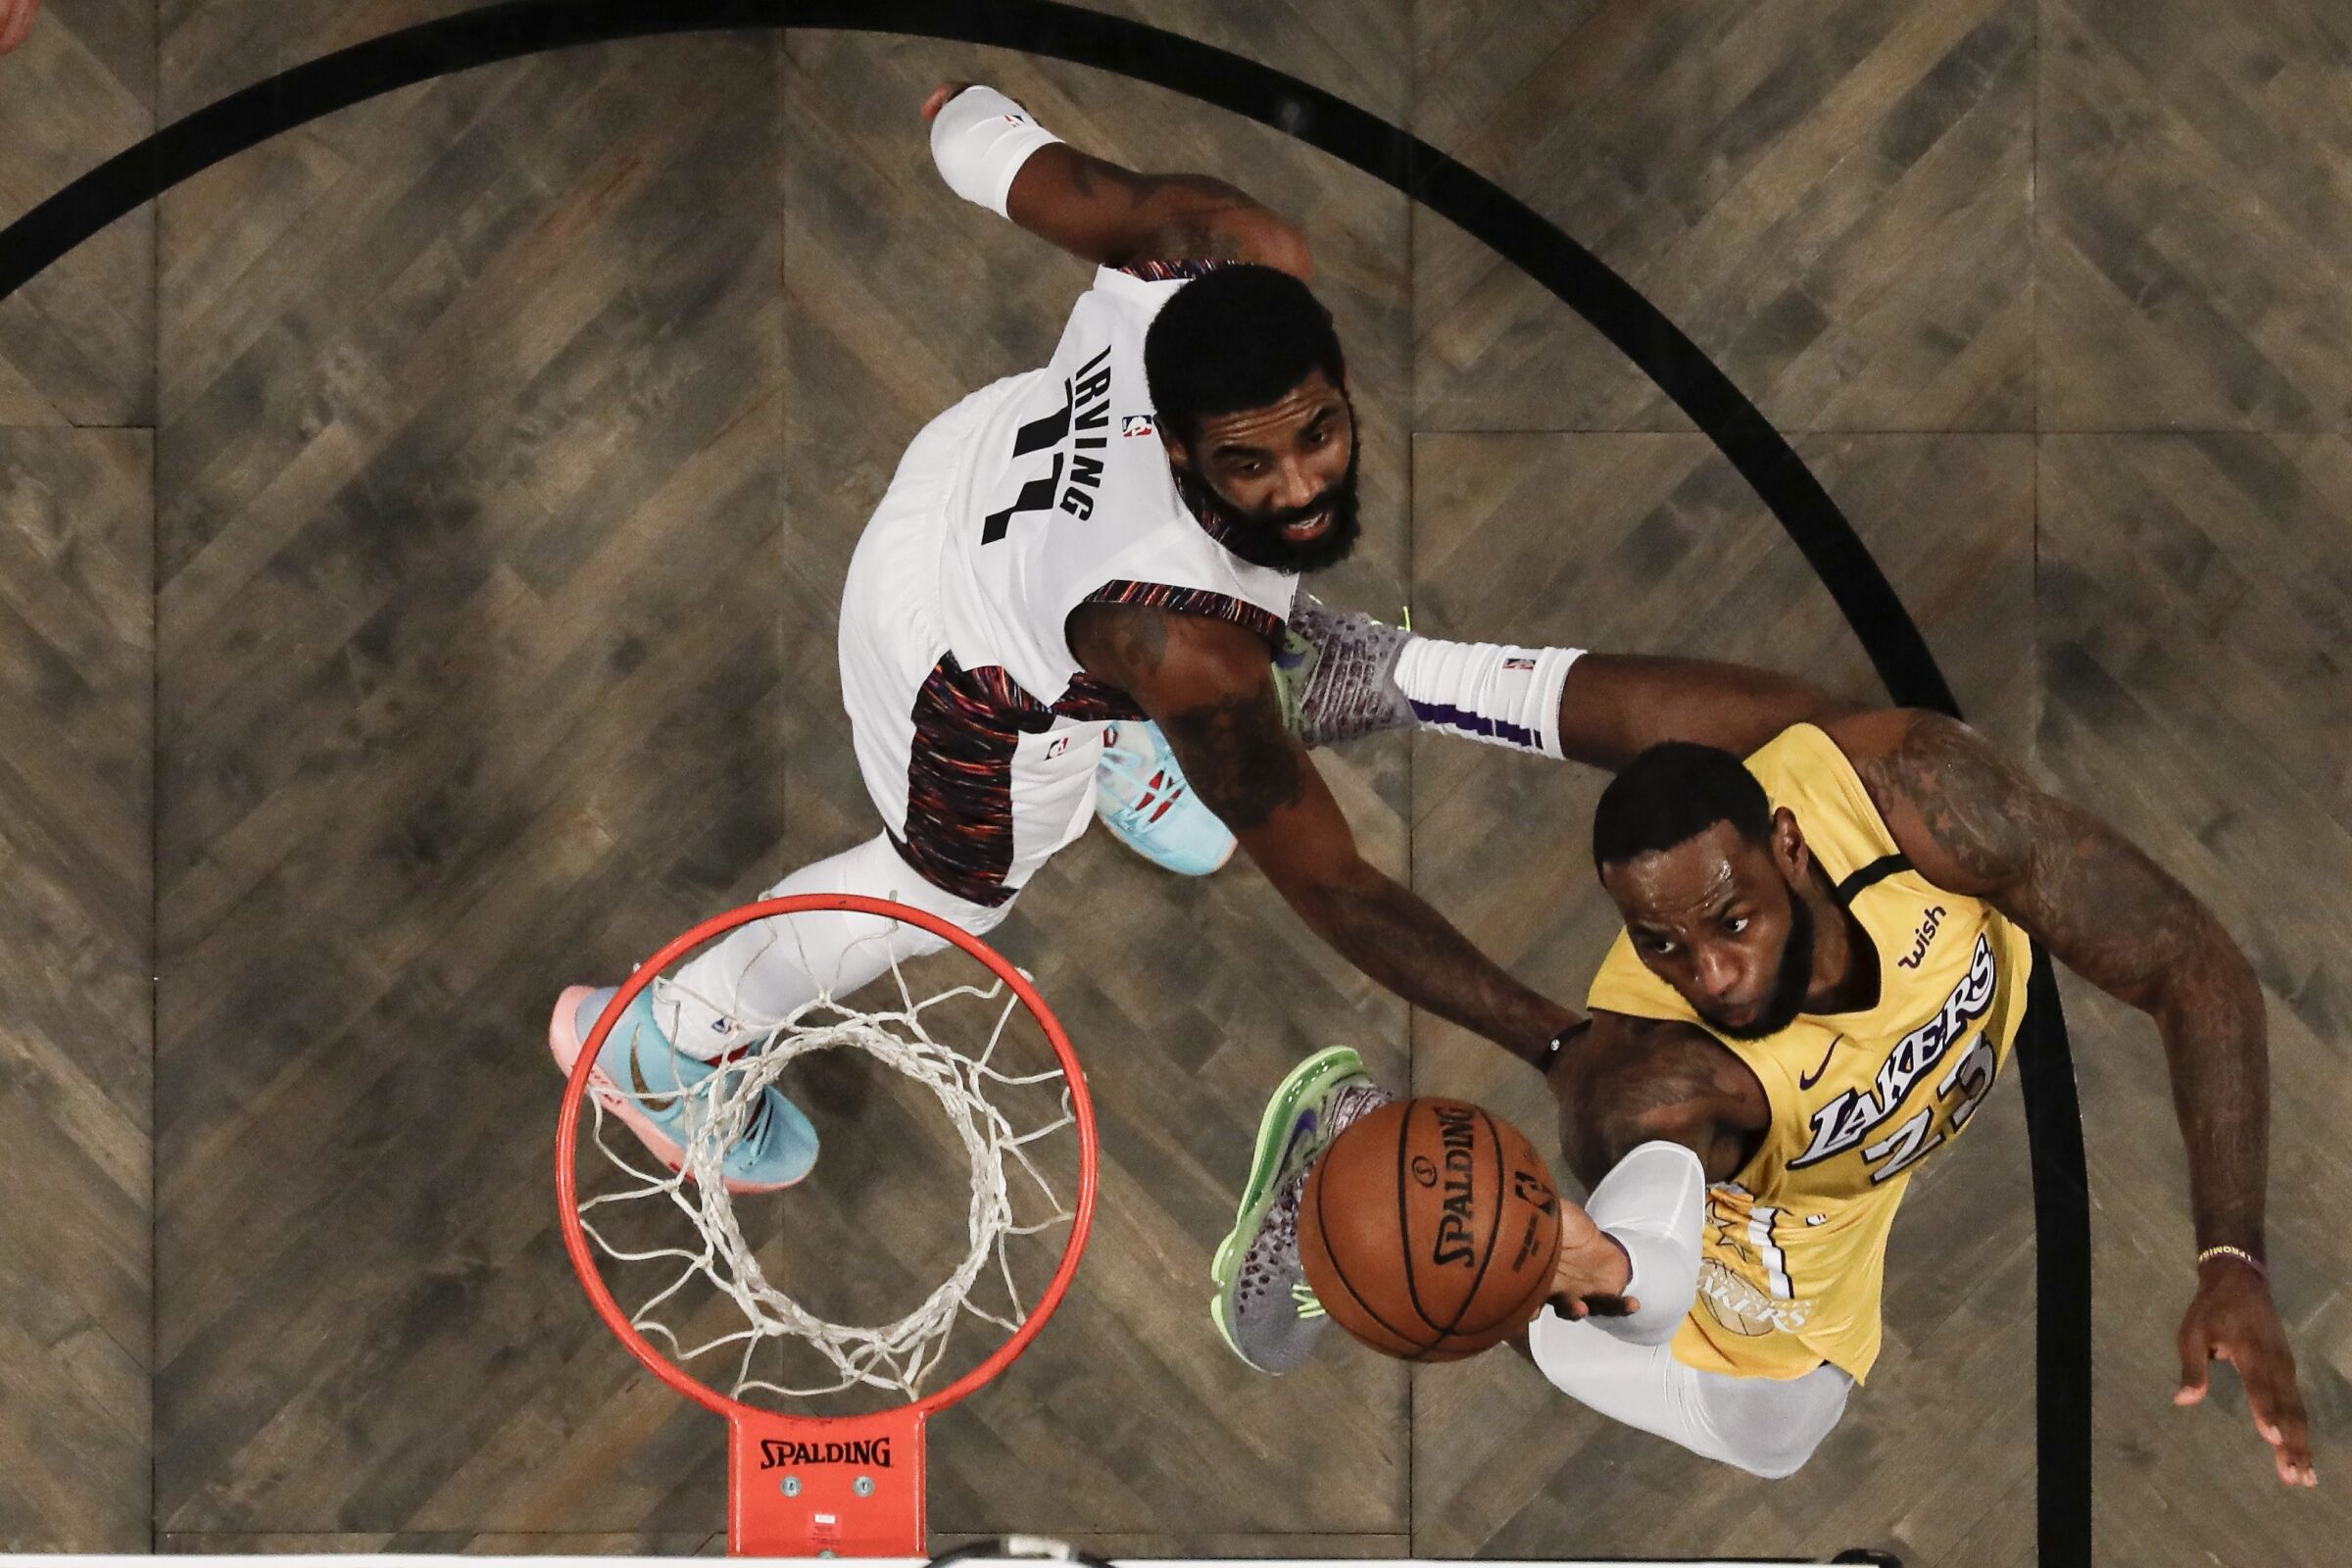 An above-the-basket view of Lakers forward LeBron James attempting a layup against Nets guard Kyrie Irving.